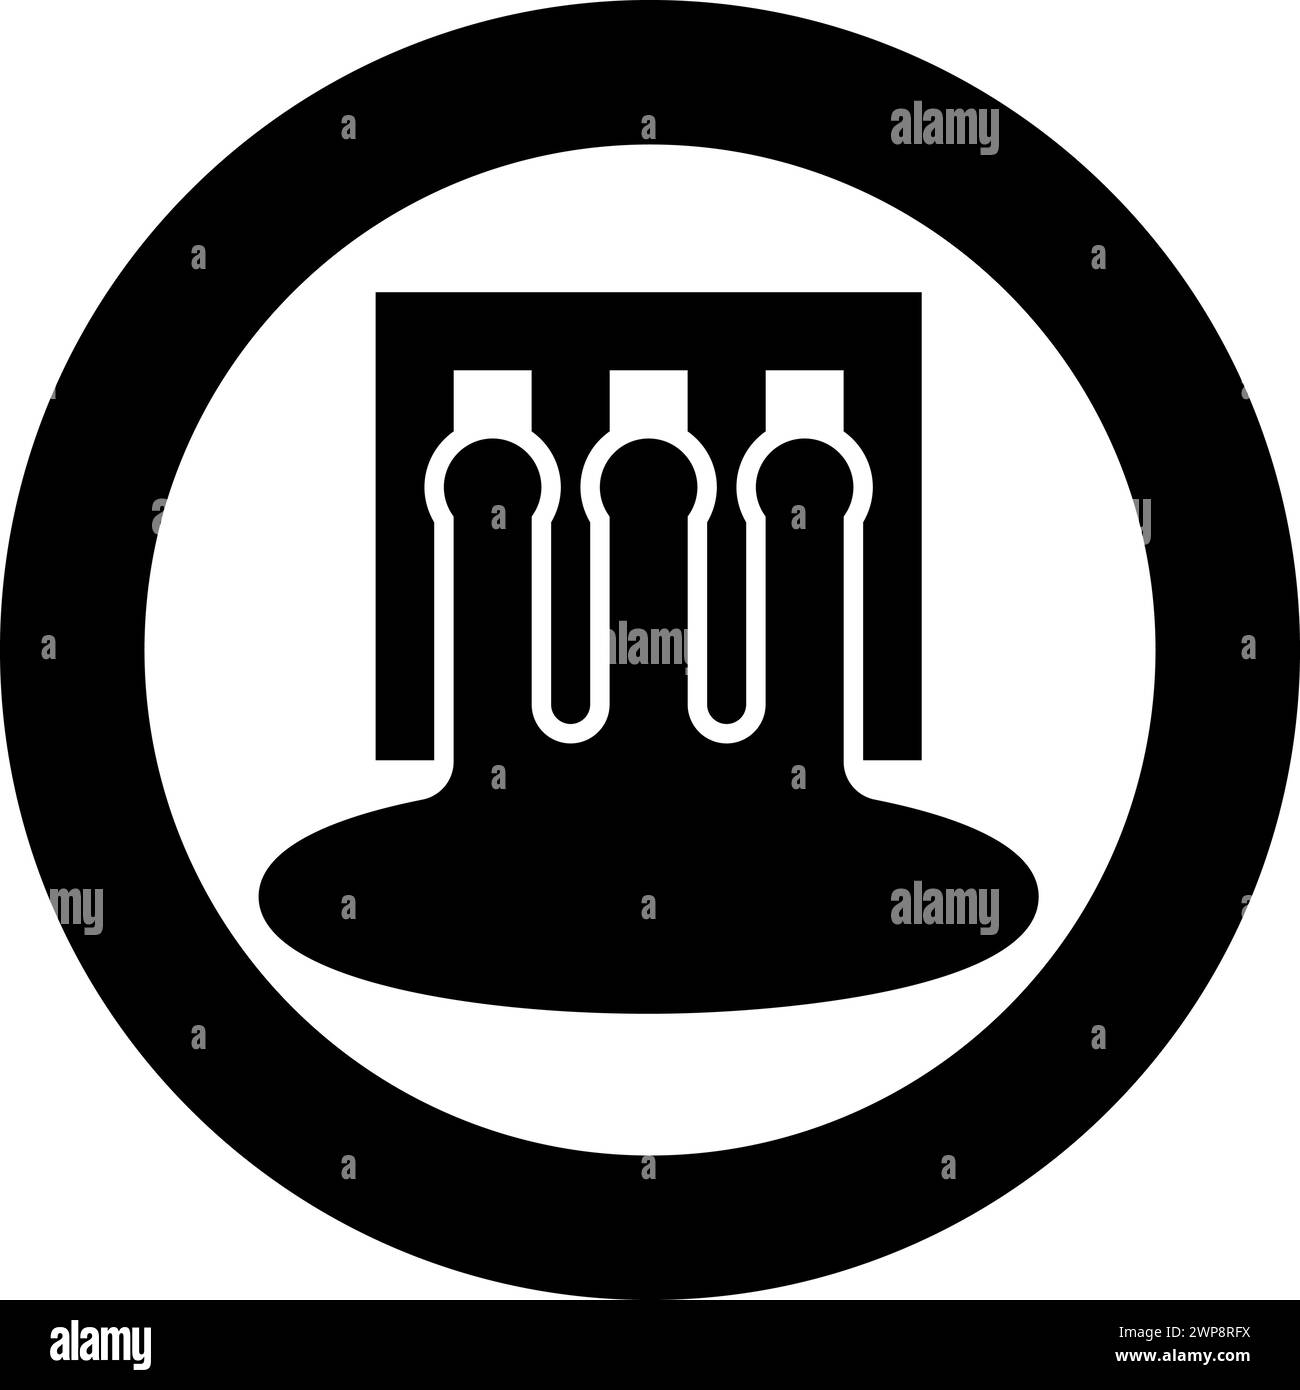 Hydro dam hydroelectric water power station hydropower energy technology plant powerhouse icon in circle round black color vector illustration image Stock Vector